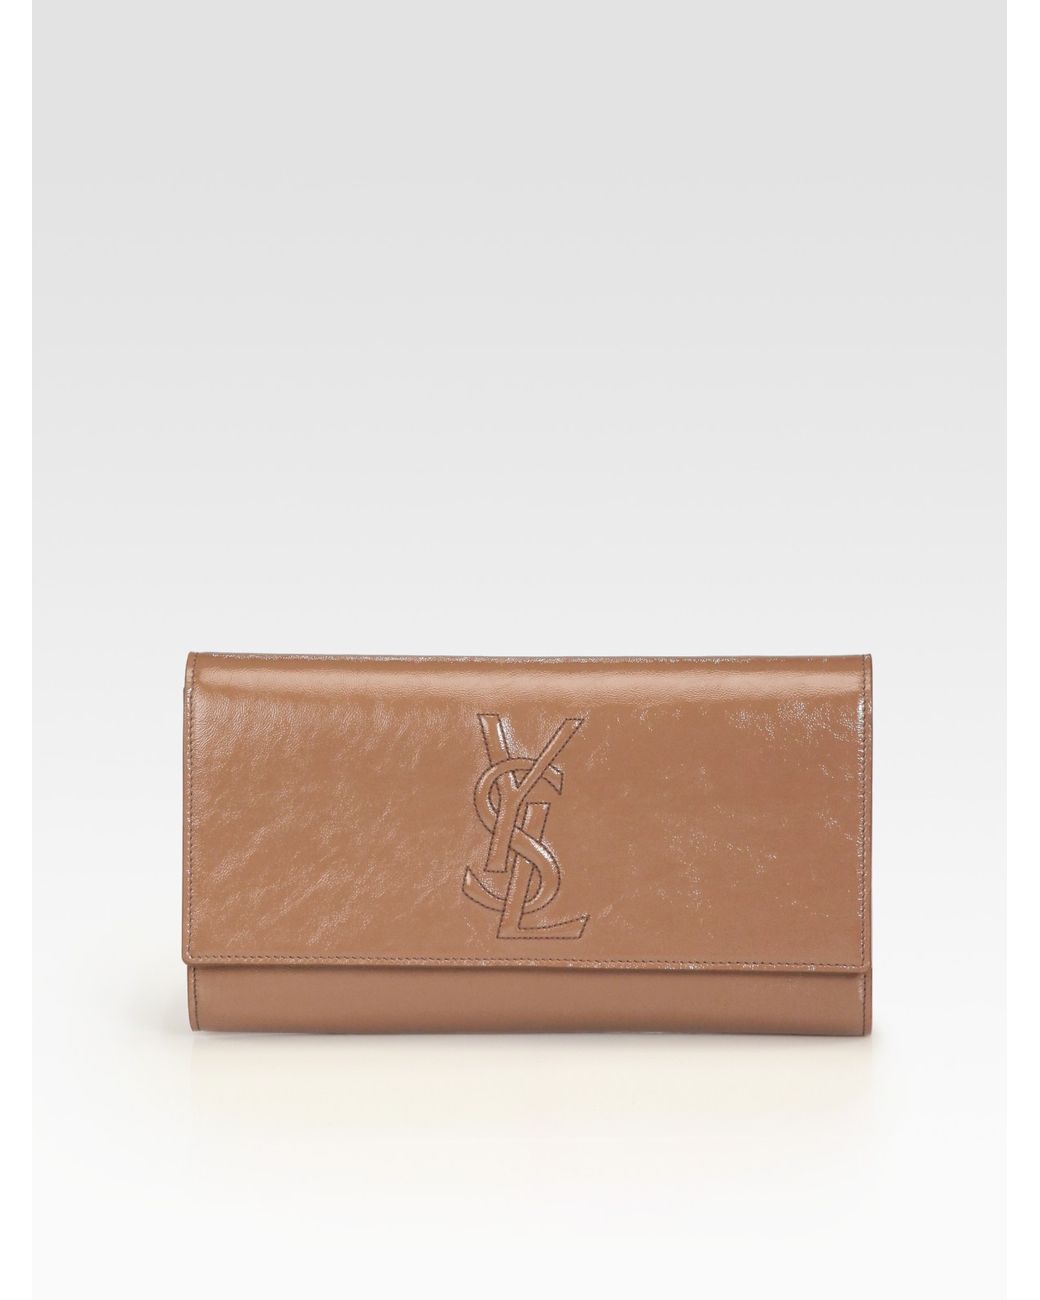 Saint Laurent Ysl Large Patent Leather Clutch in Brown